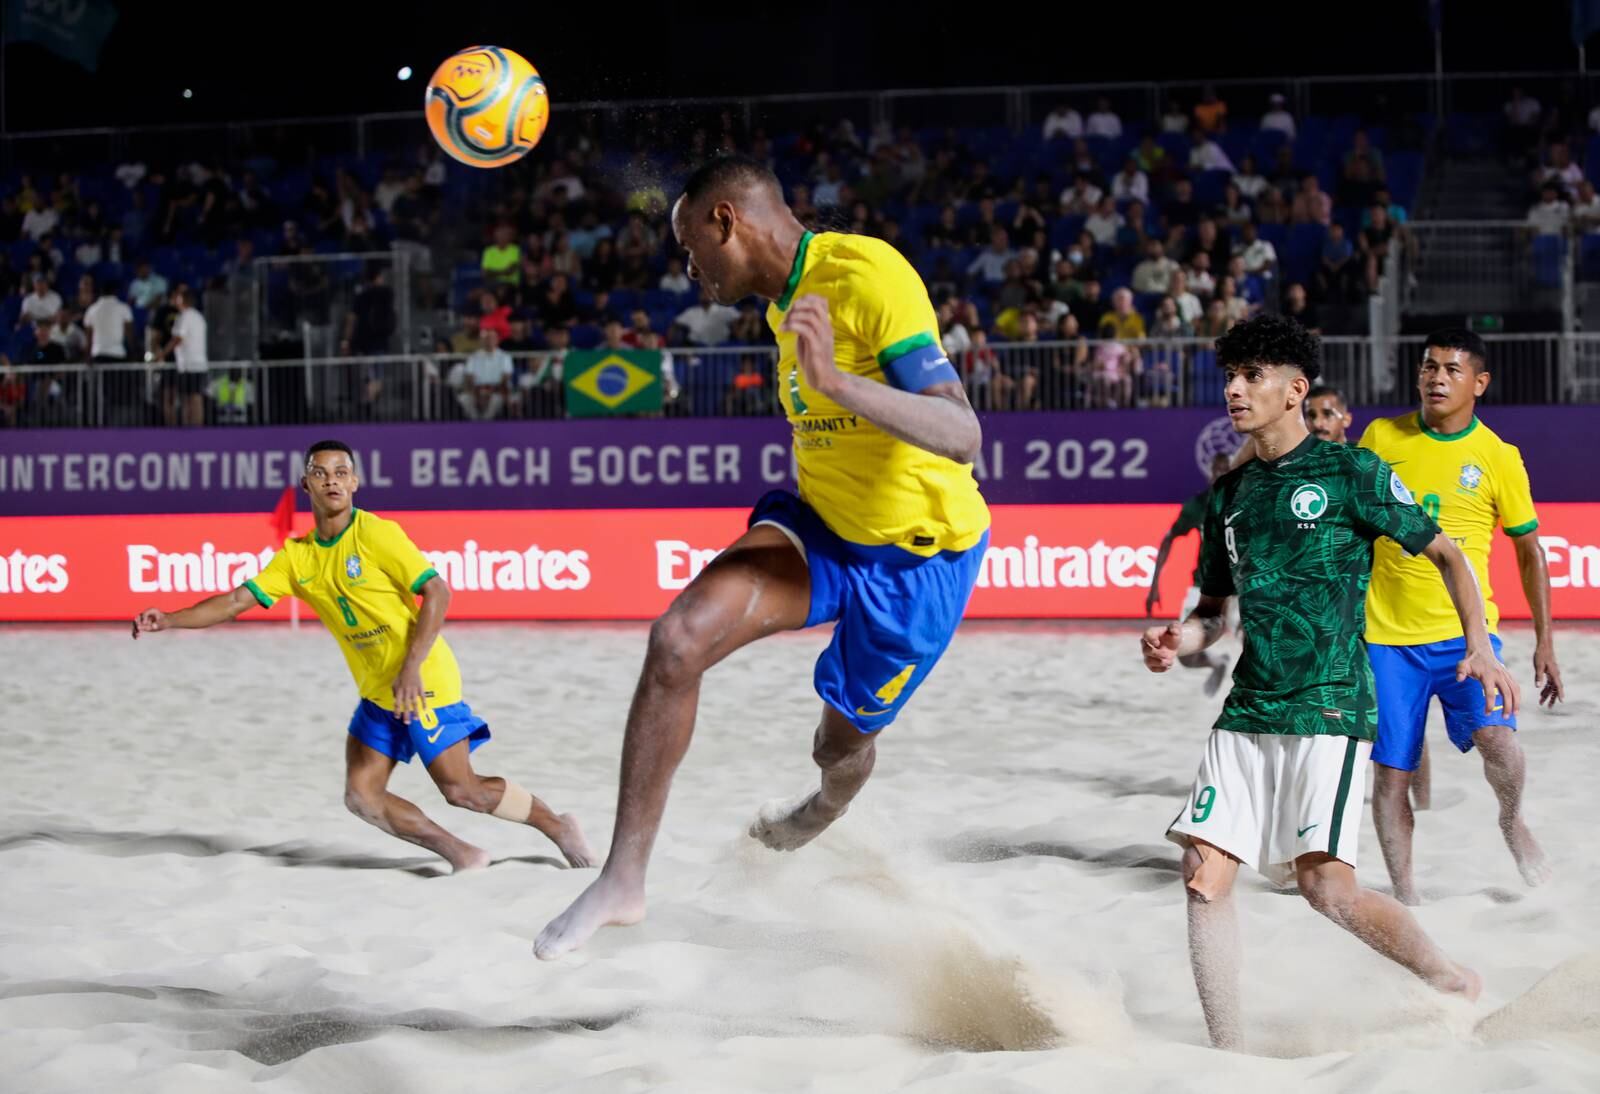 Catarino (Front) of Brazil in action during the Emirates Intercontinental Beach Soccer Cup 2022 group A match between Saudi Arabia and Brazil, in Gulf emirate of Dubai, United Arab Emirates, 01 November 2022. EPA / ALI HAIDER